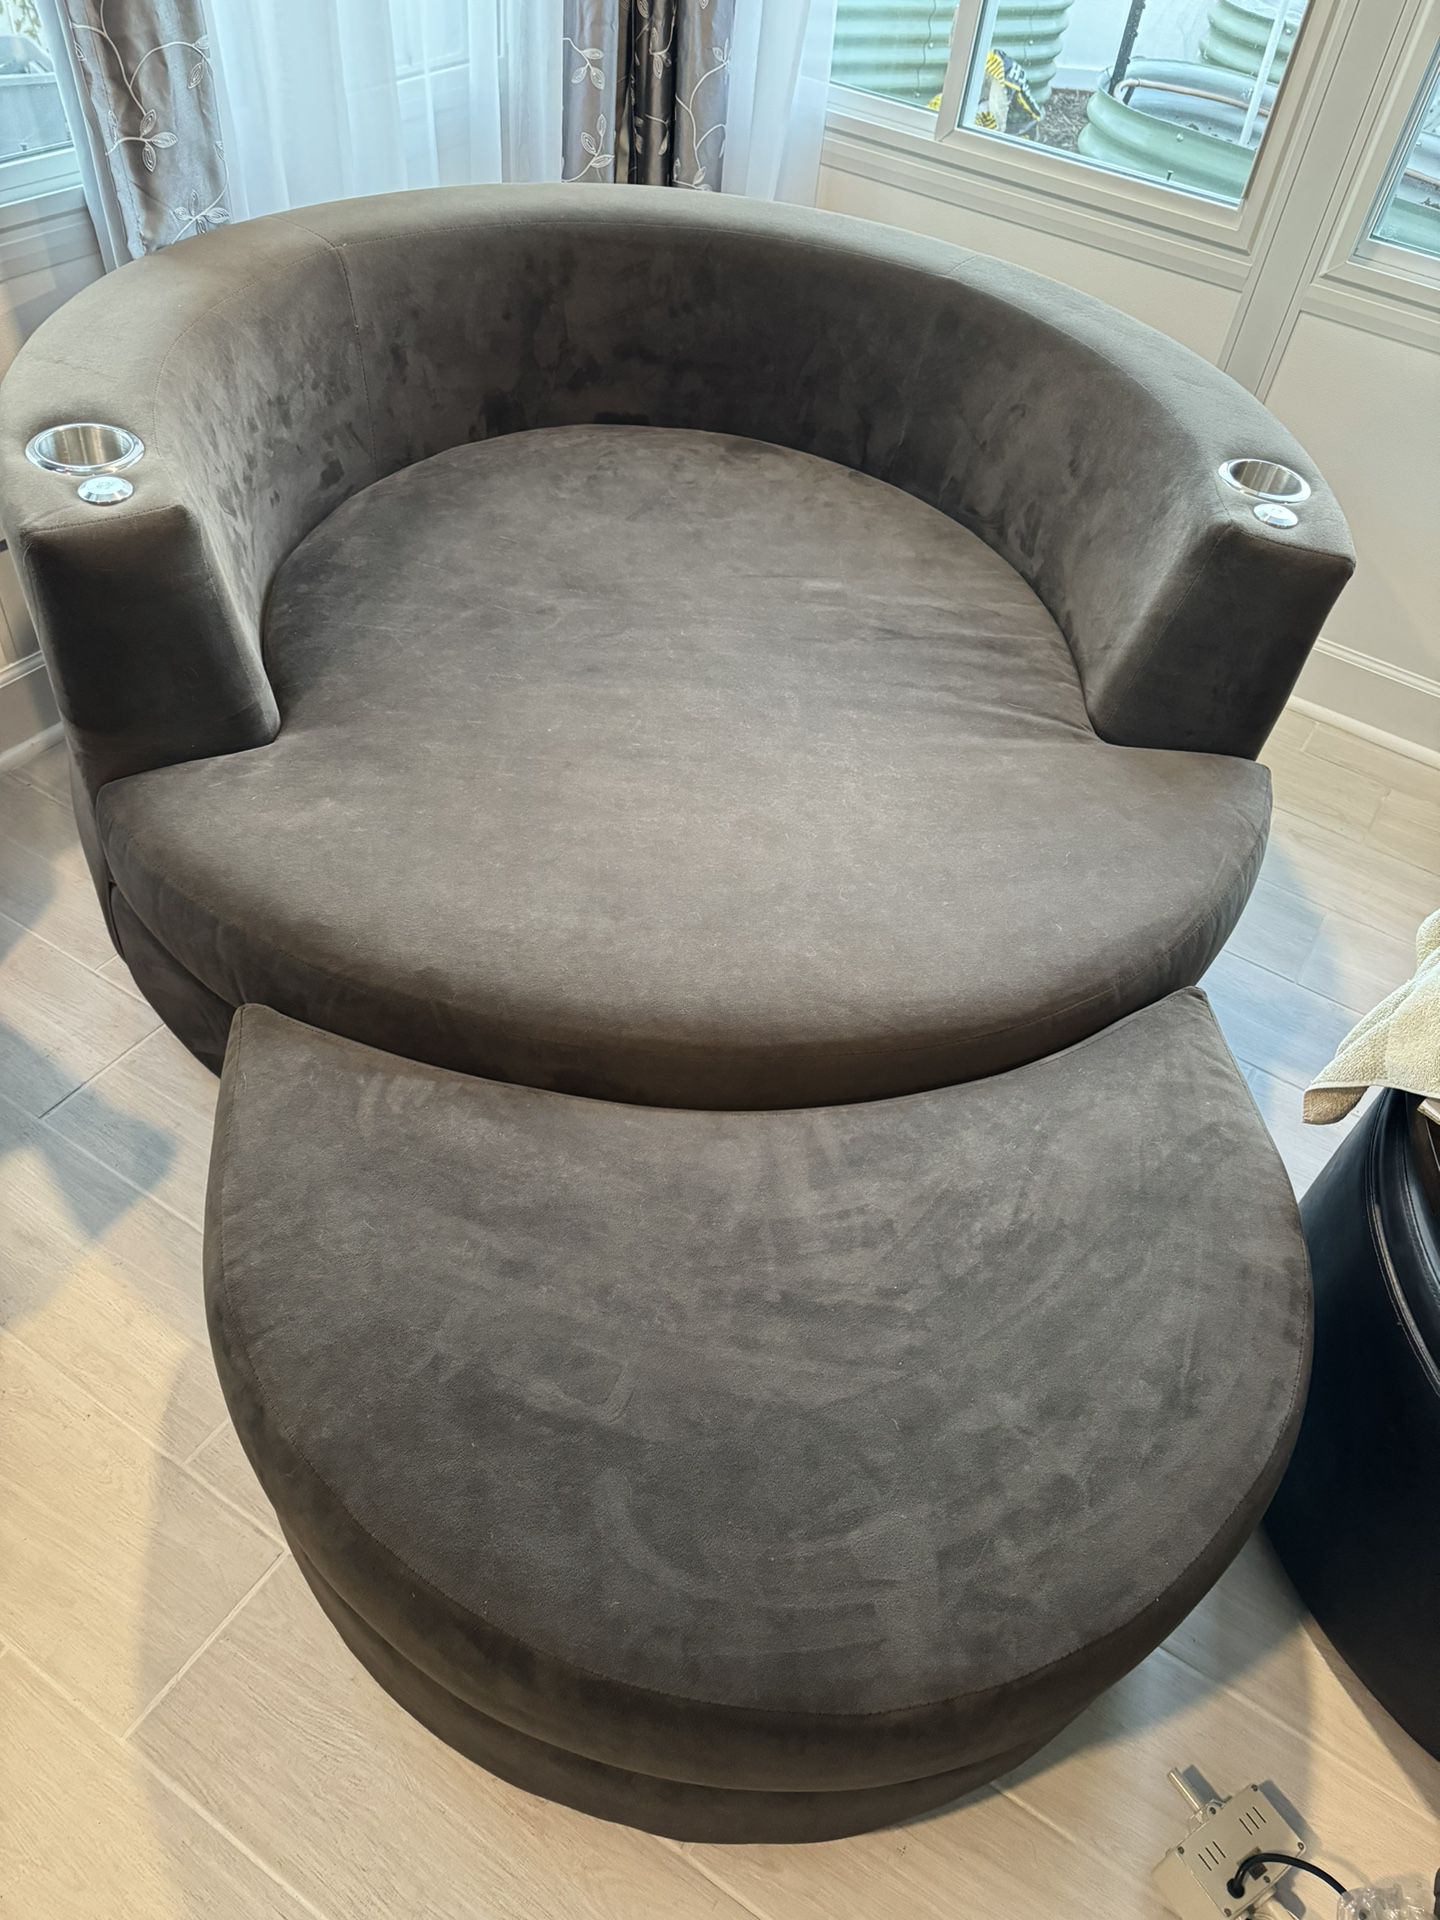 Round Swivel Theatre Chair With Cup Holders And Tray Table